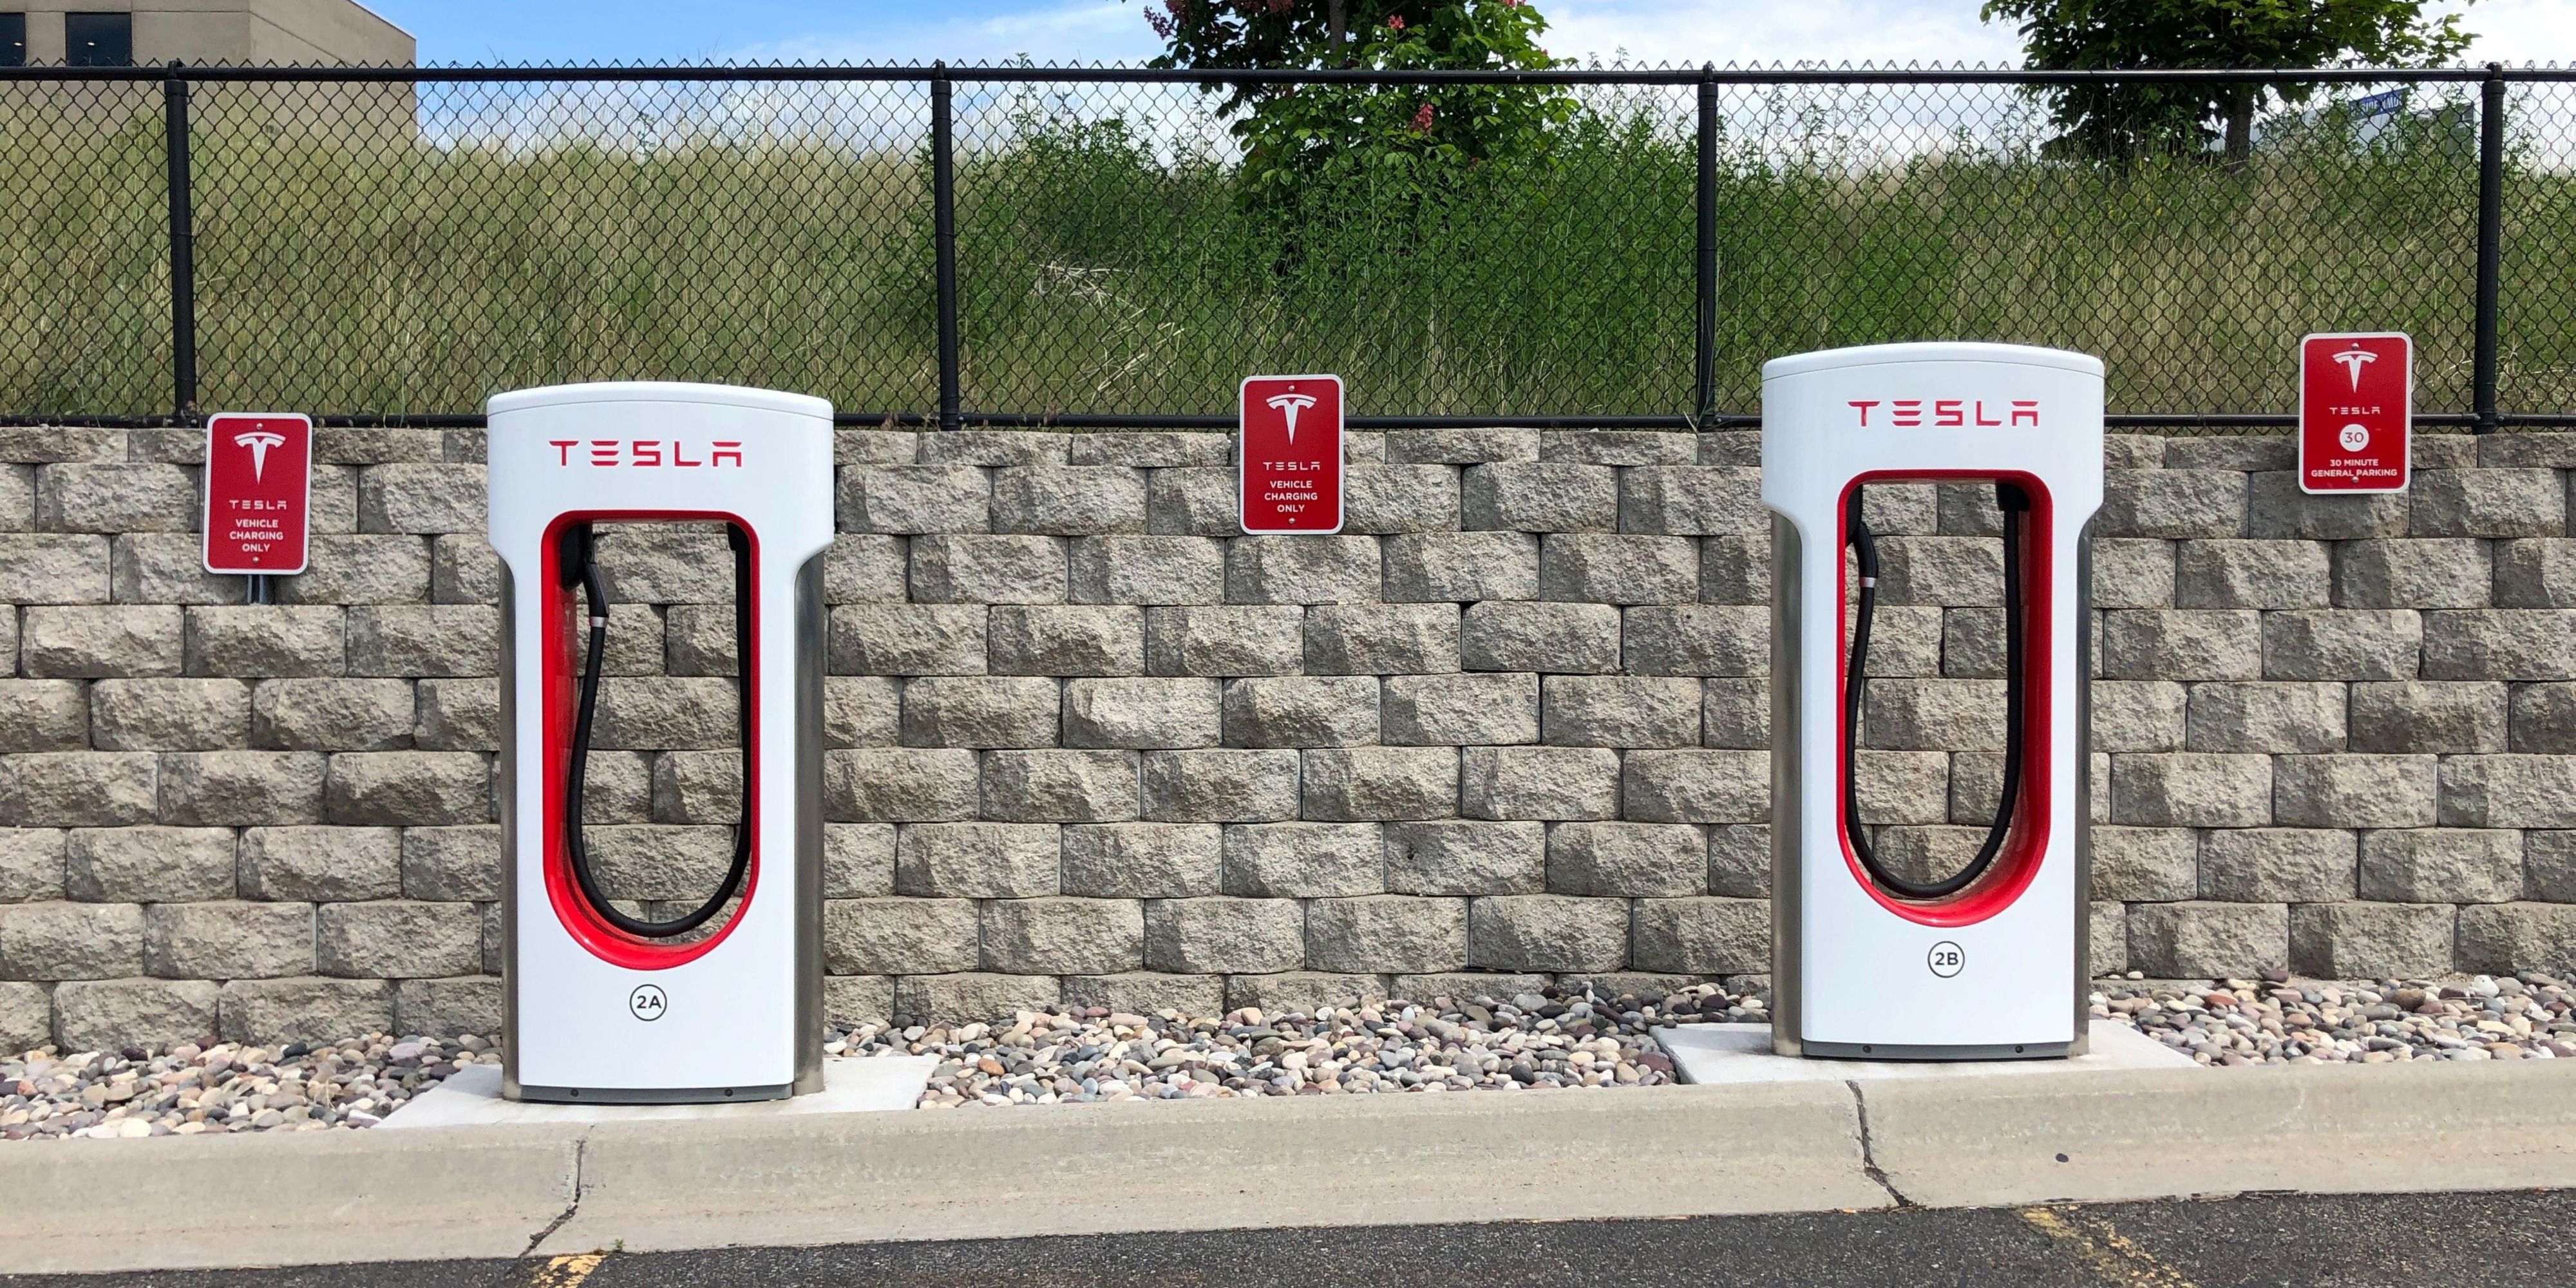 We offer 6 Supercharge stations available 24/7 and with up to 120kW for your charging needs. 